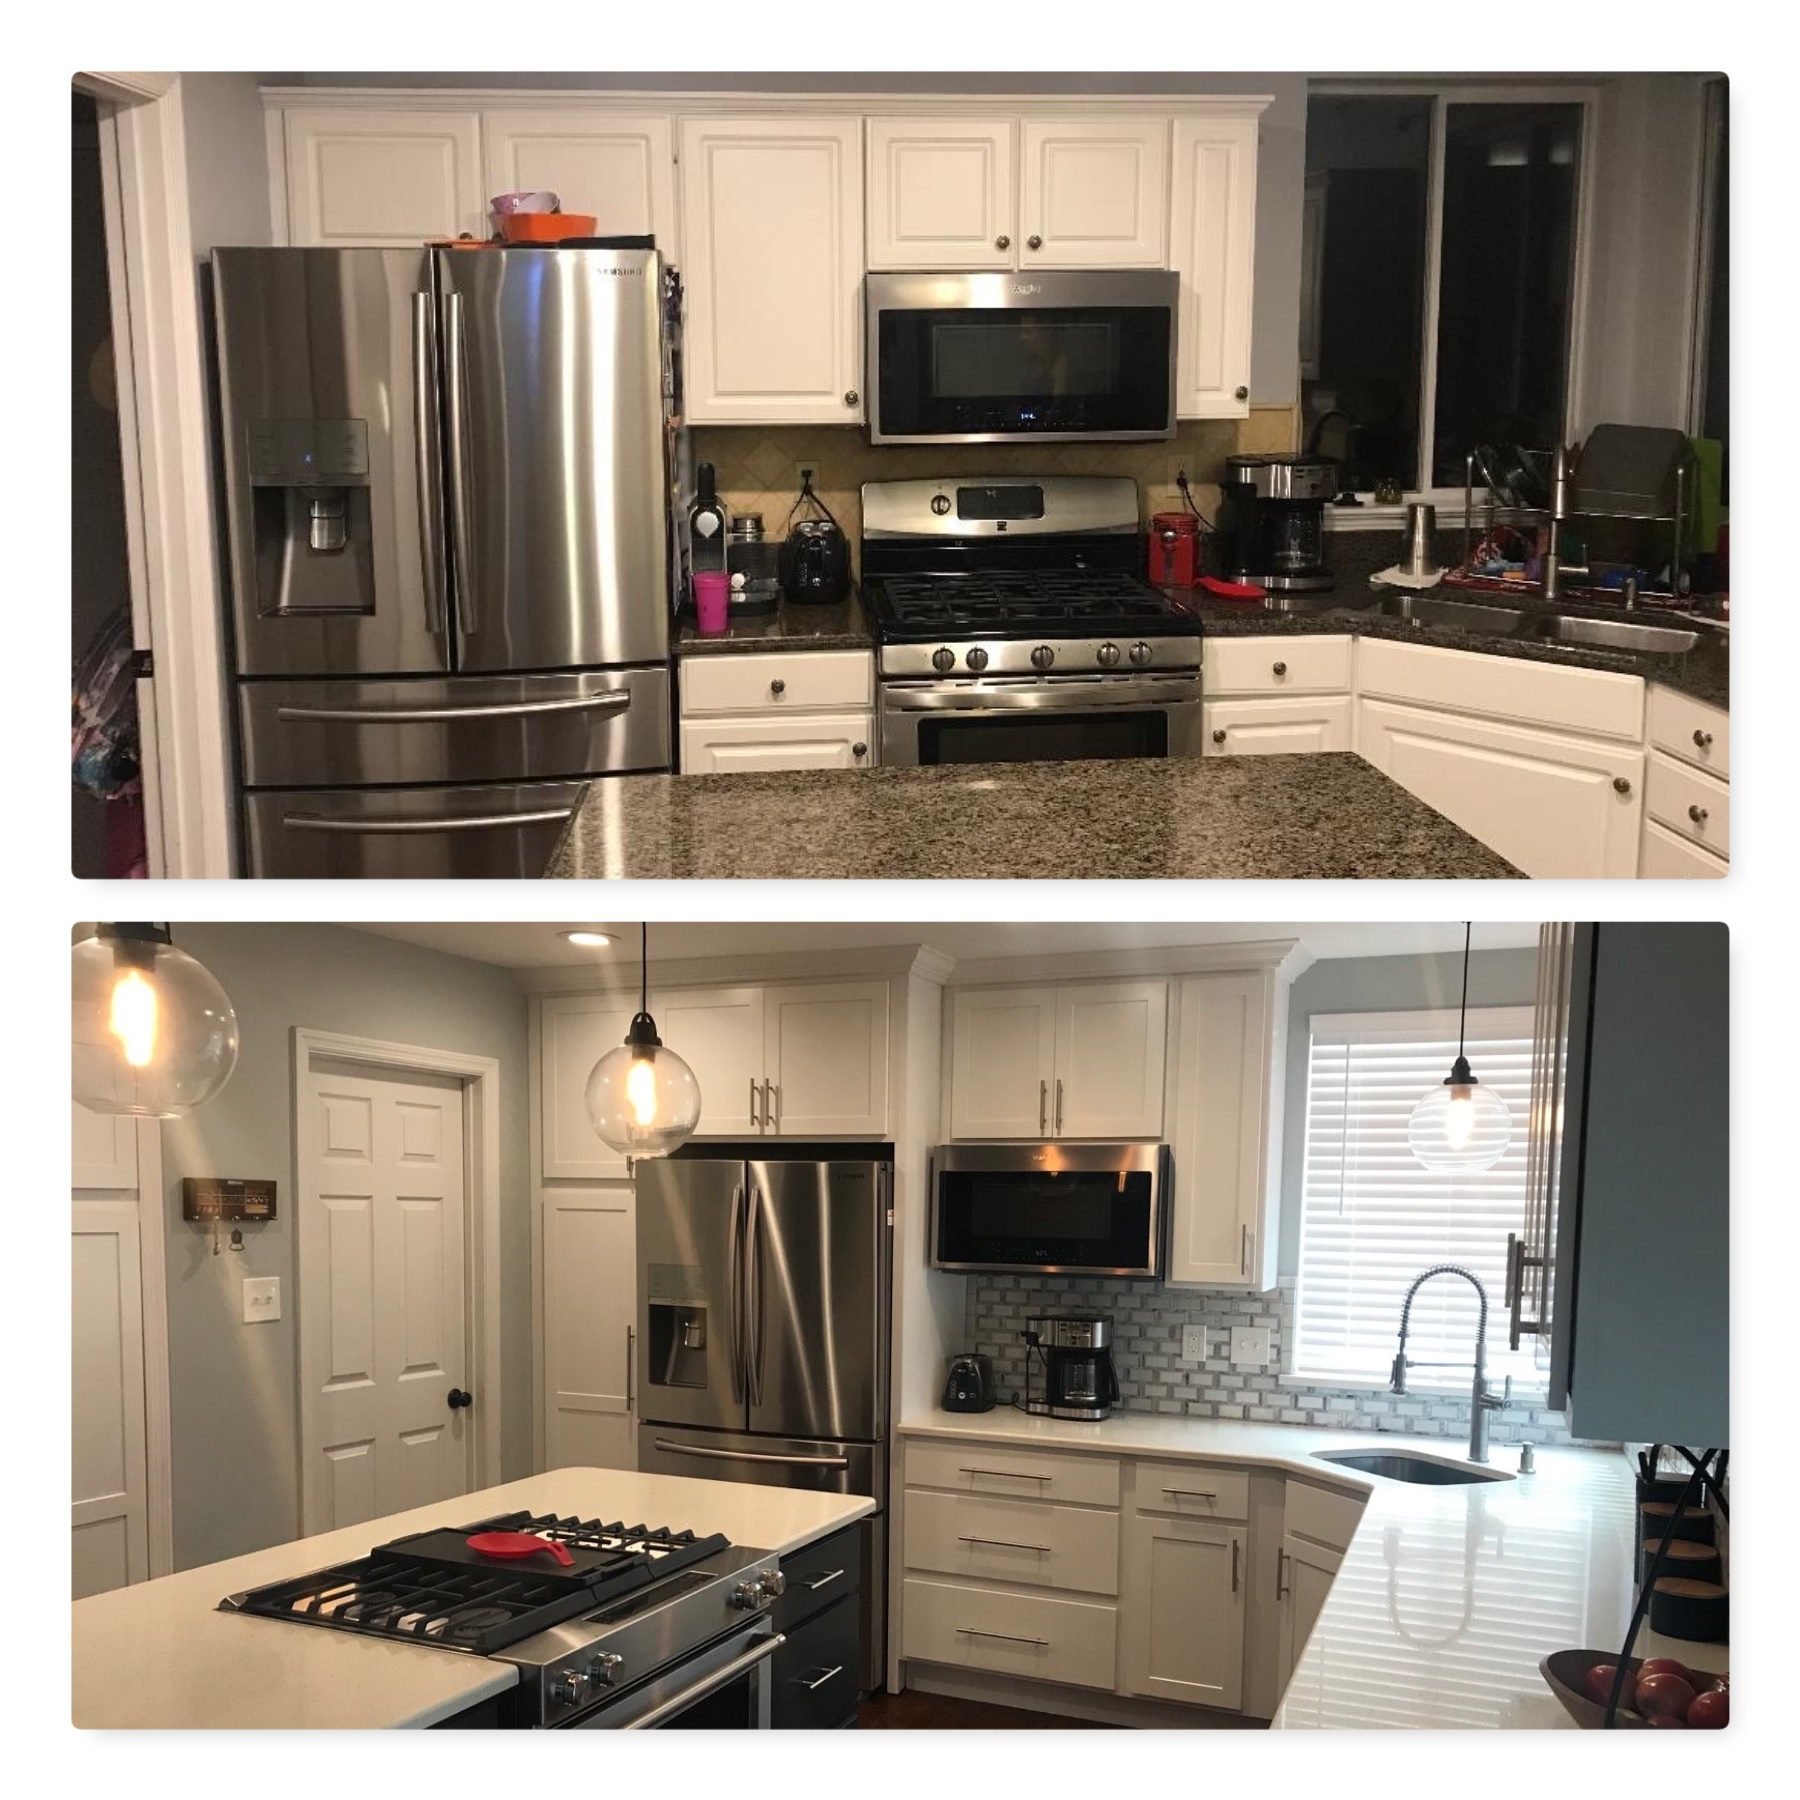 Before and After Kitchen Remodel Project